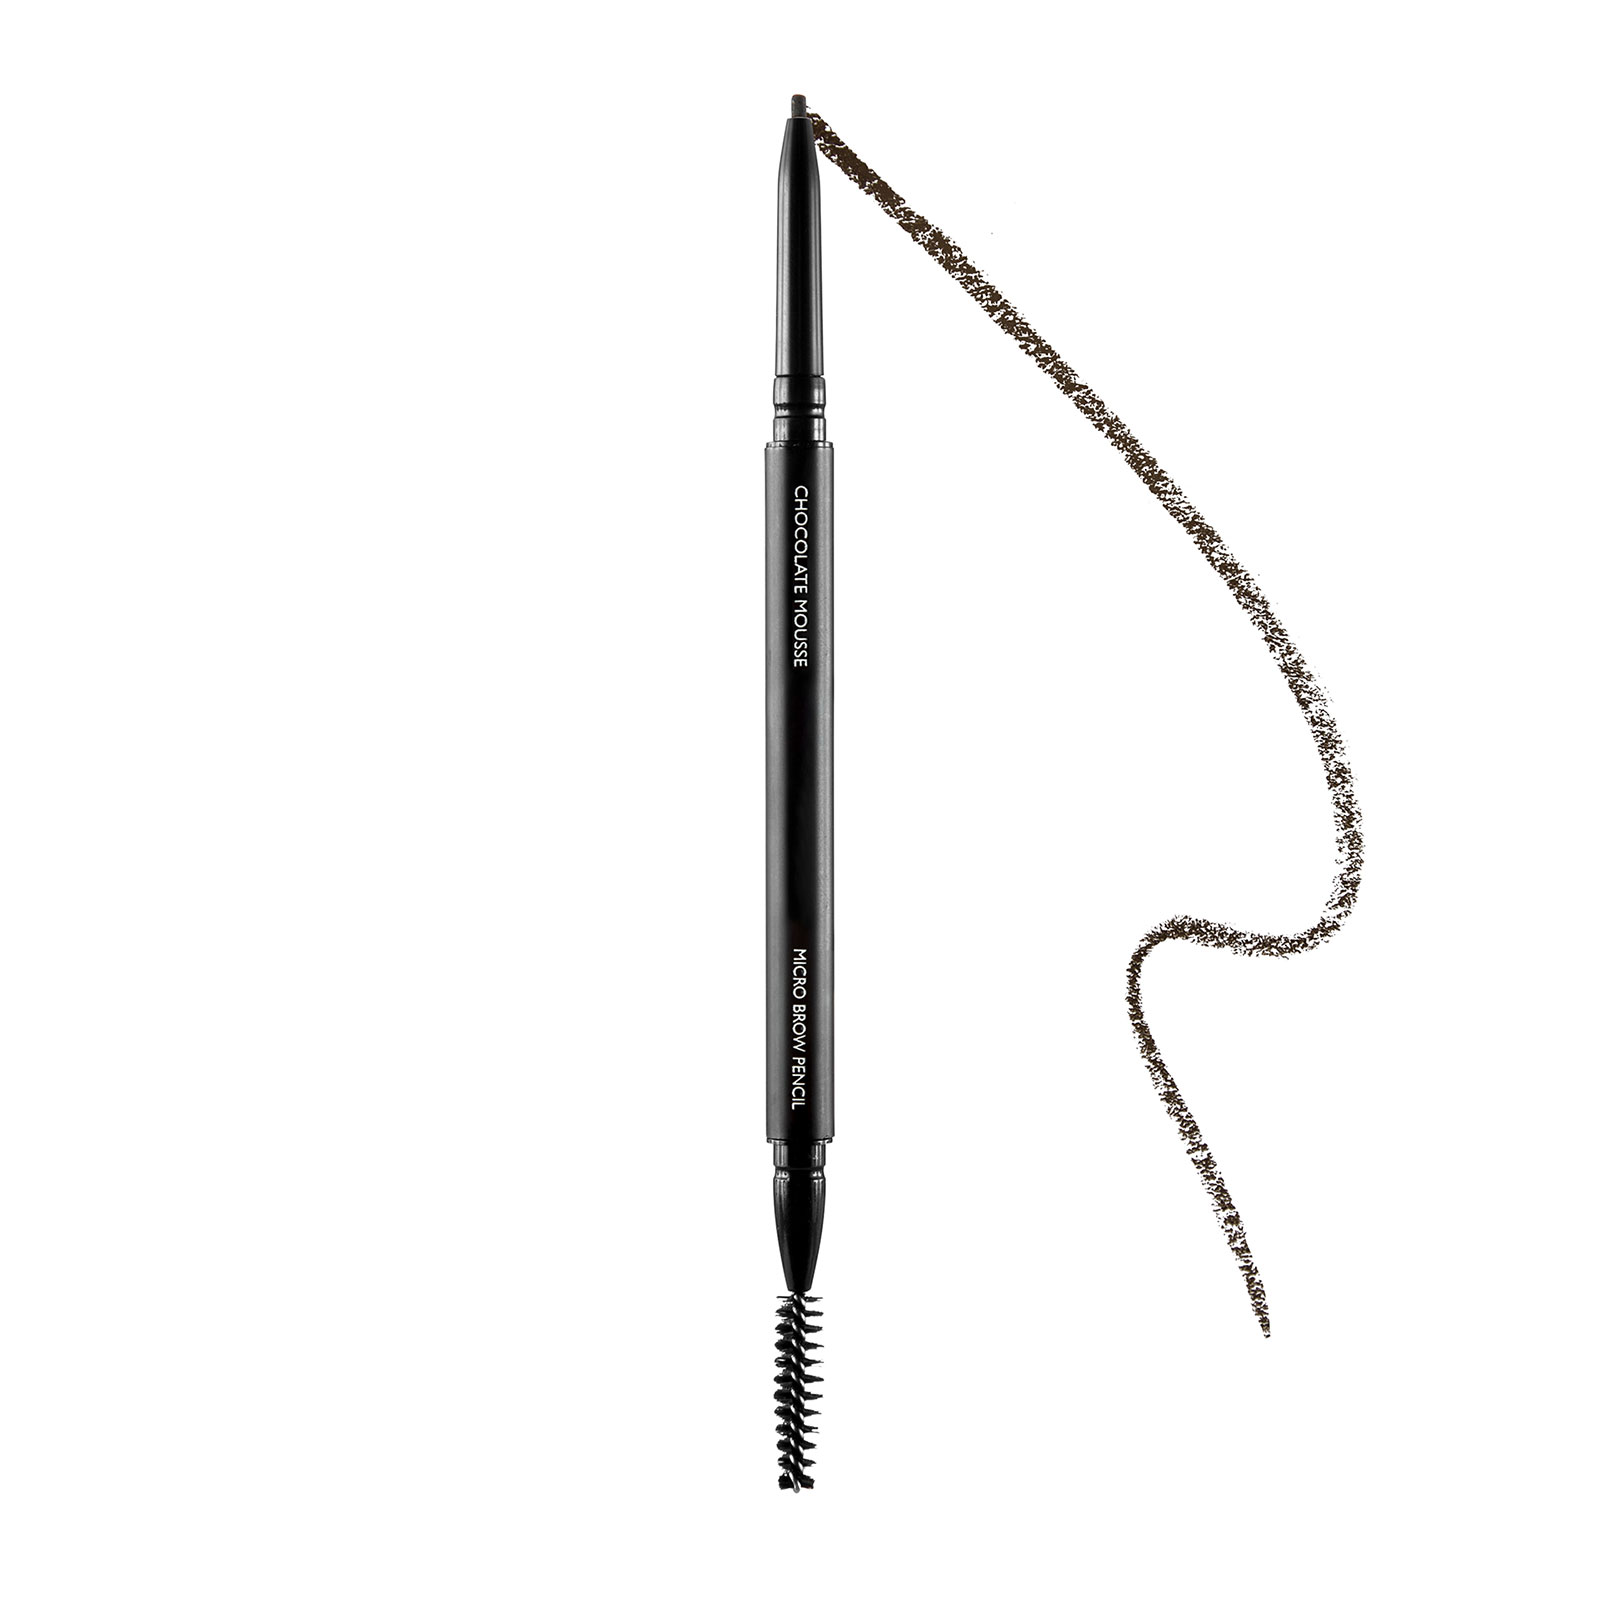 Morphe Micro Brow Pencil 0.1G Chocolate Mousse